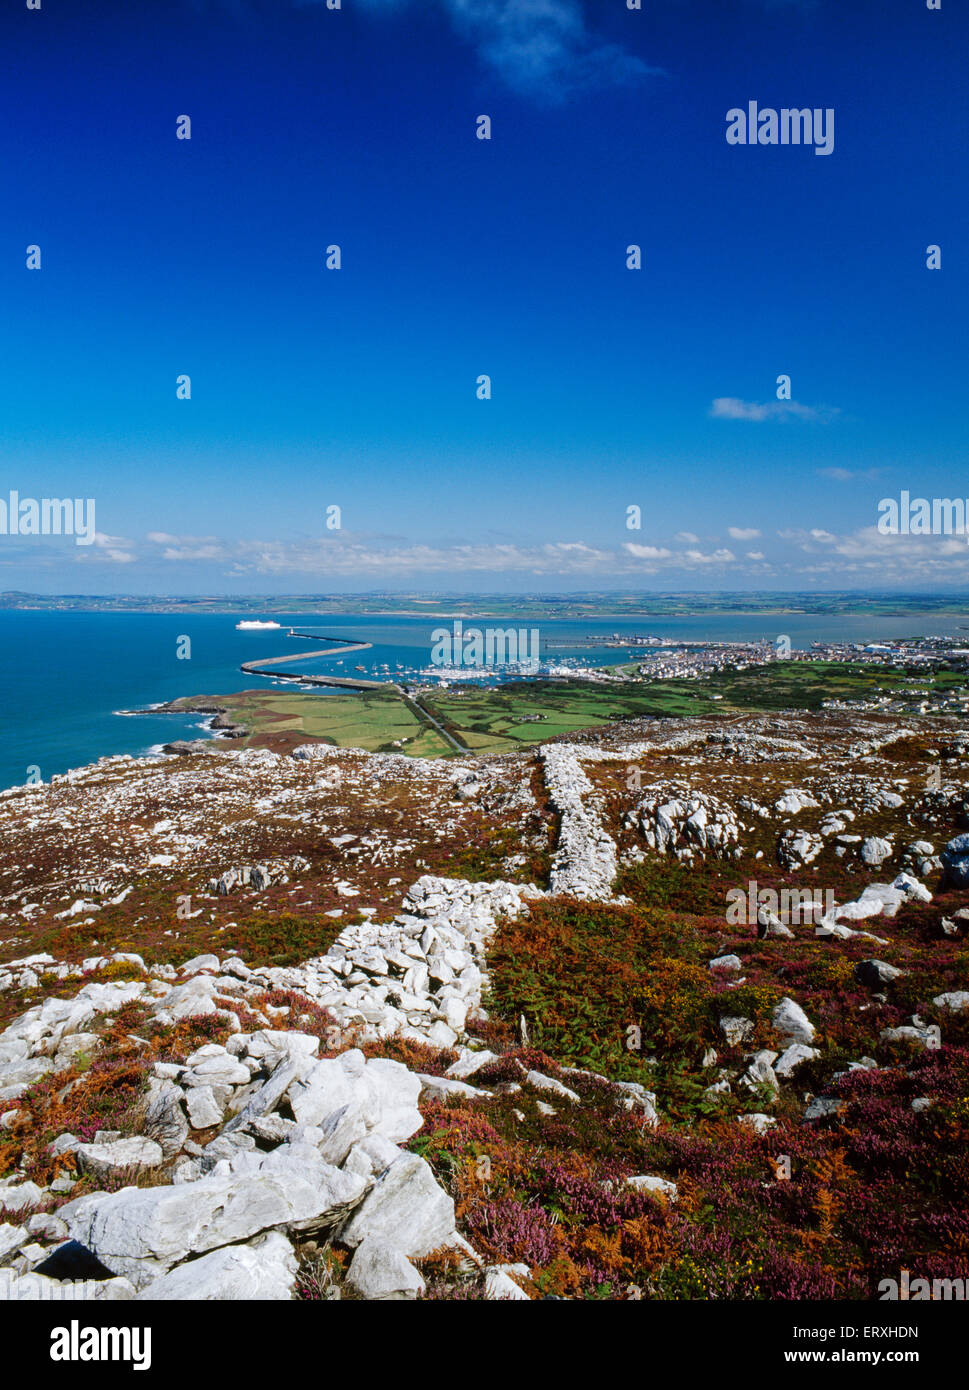 View along the ramparts of Caer y Twr Iron Age hillfort, Holyhead Mountain, Anglesey, to Holyhead harbour & breakwater, with departing Irish ferry. Stock Photo